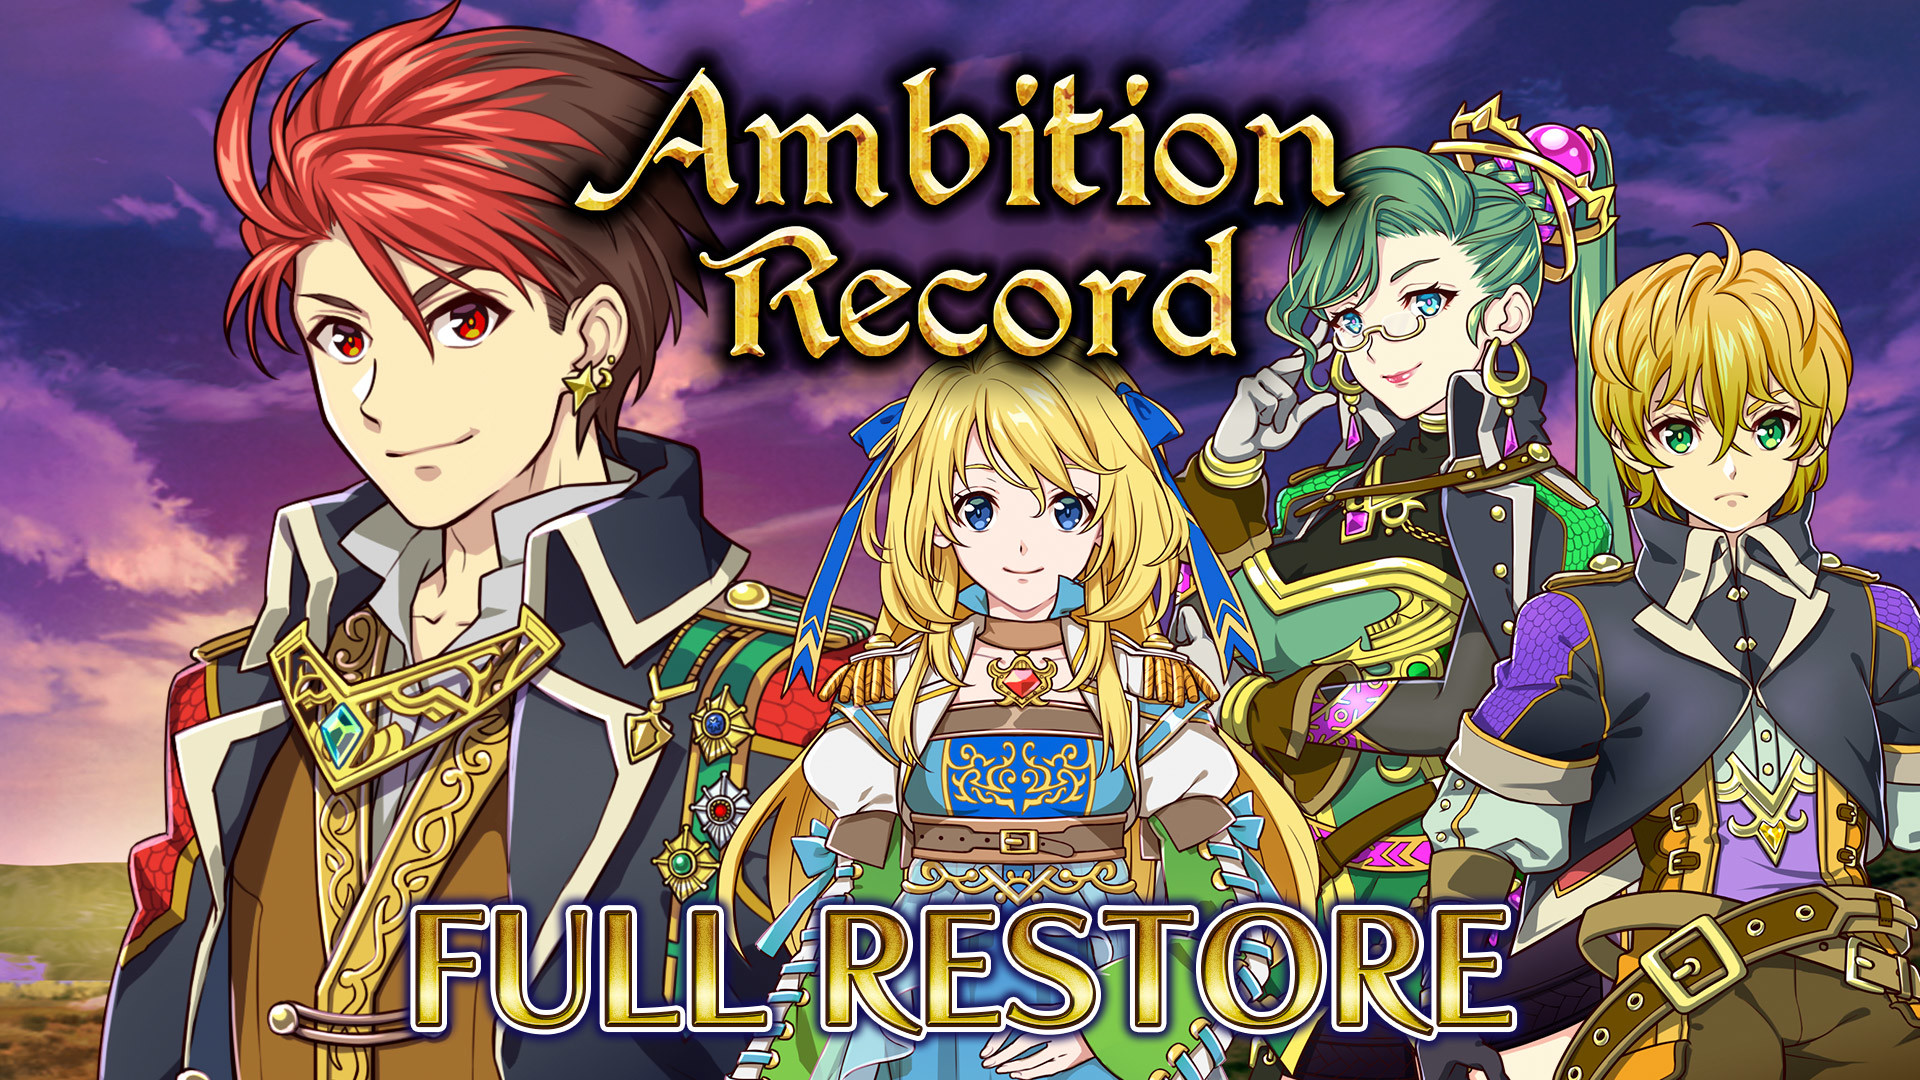 Full Restore - Ambition Record Featured Screenshot #1